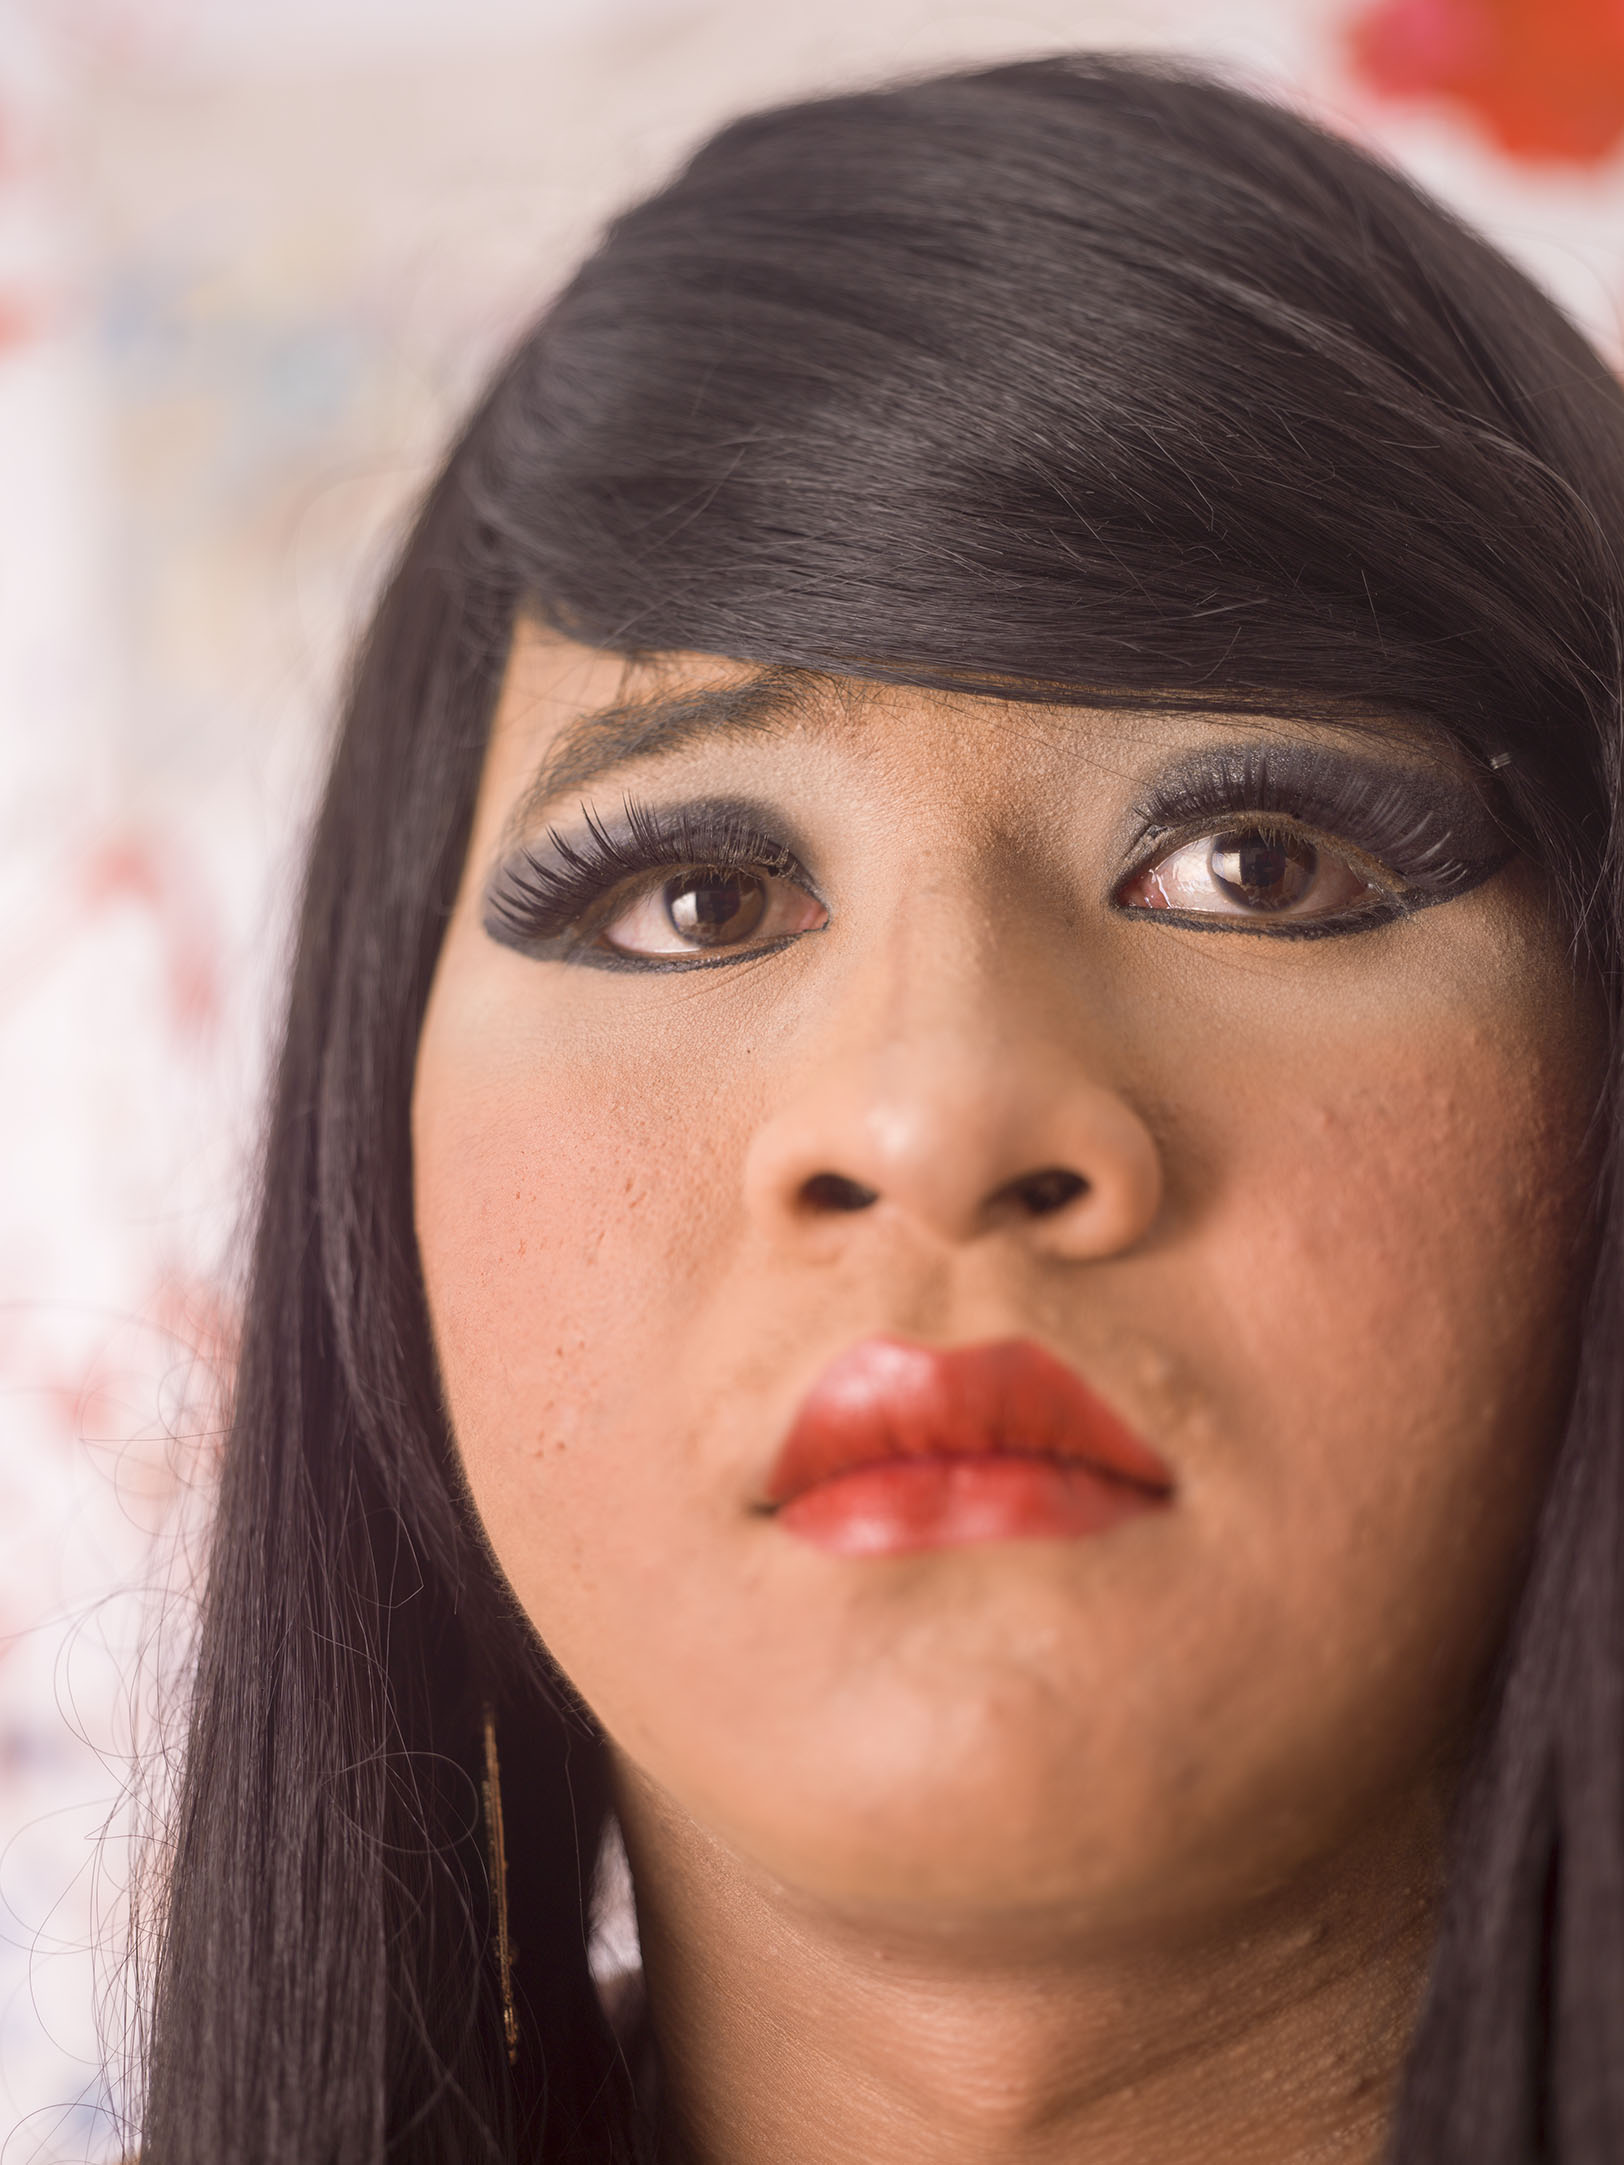 Drag in Cambodia: Tuy Suoy / Chhim Thi portrait	by Martijn Crowe 